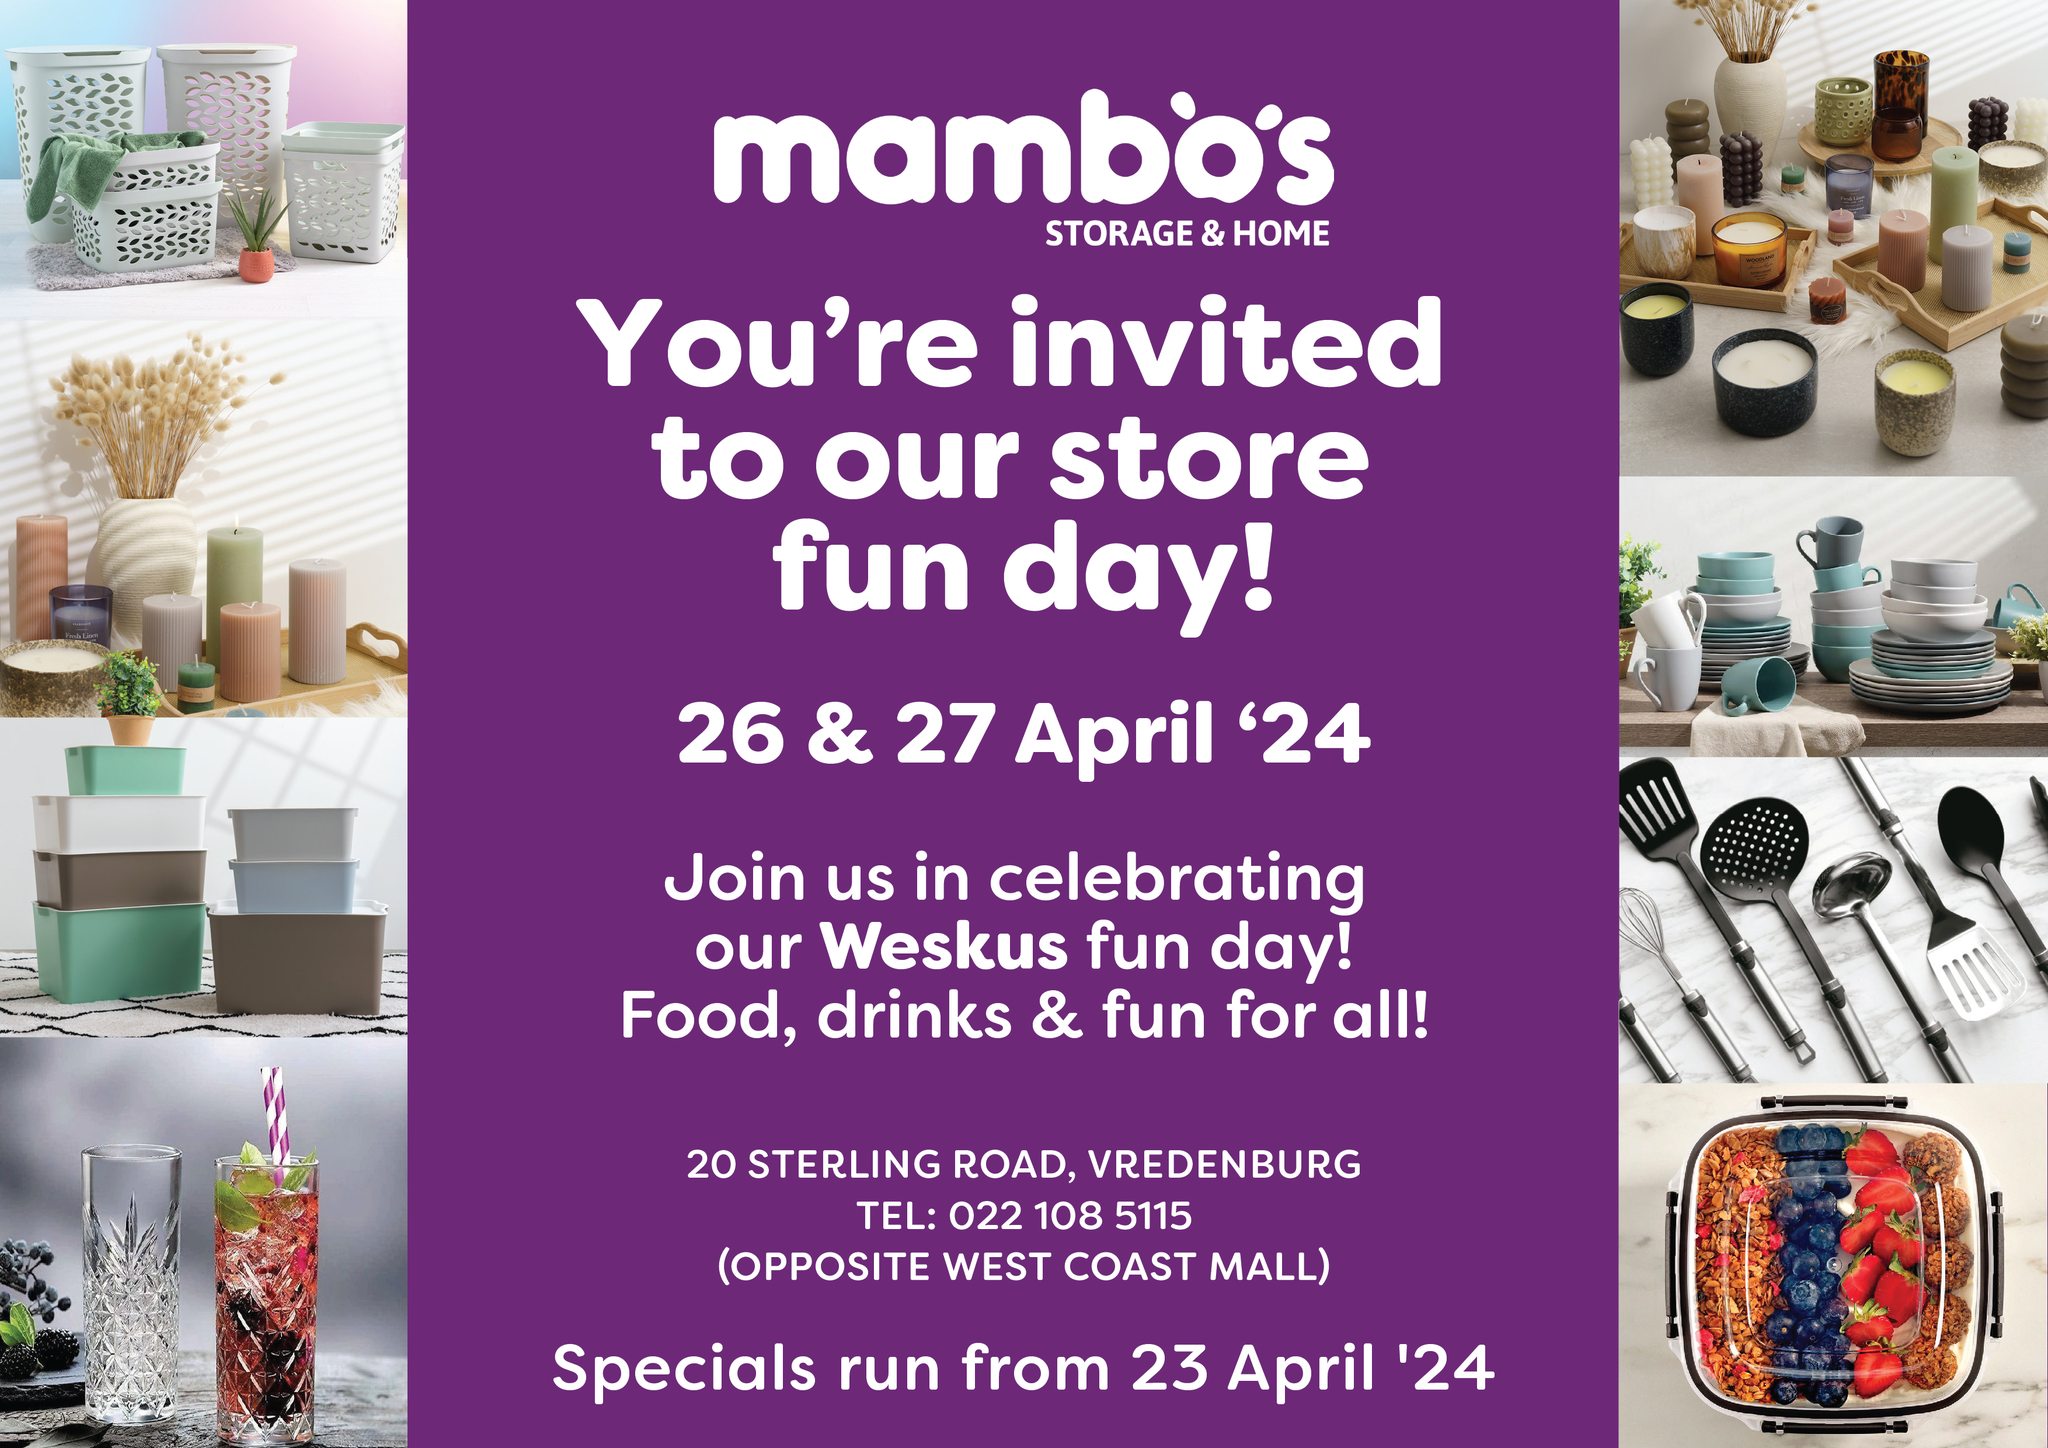 26 - 27 APRIL 2024 - MAMBO’S STORAGE AND HOME IS NOW OPEN OPPOSITE WEST COAST MALL NEXT TO  ACDC. GET ALL YOUR DAILY CLEANING AND TIDYING UP SORTED WITH THEIR INCREDIBLE OPENING  SPECIALS. BUY 5 LITRES HOUSEHOLD BLEACH, DISHWASHING LIQUID AND PINE SANITISER -  ONLY R150 FOR ALL THREE! AND GET DURABLE BROOMS FOR ONLY R25 AND MOPS FOR ONLY  R35. ADD HEAVY DUTY BLACK REFUSE BAGS, ONLY R119 FOR ONE HUNDRED.  MAMBOS IS NOW OPEN OPPOSITE WEST COAST MALL NEXT TO ACDC.  MAKE YOUR HOME YOUR HAPPY ZONE.     JOIN US ON 26TH AN 27TH THIS FRIDAY AND SATURDAY AT MAMBO’S STORAGE & HOME  OPPOSITE THE WEST COAST MALL FOR A FUN FILLED DAY OF GREAT SPECIALS, SCRUMPTIOUS BOERIE  ROLLS, CANDY FLOSS AND OTHER SWEET TREATS AND FUN FOR THE KIDS. ALSO MEET THE  PERRONFM 95.1 TEAM FROM 10H00 – UNTIL 14H00 ON FRIDAY 26 APRIL.